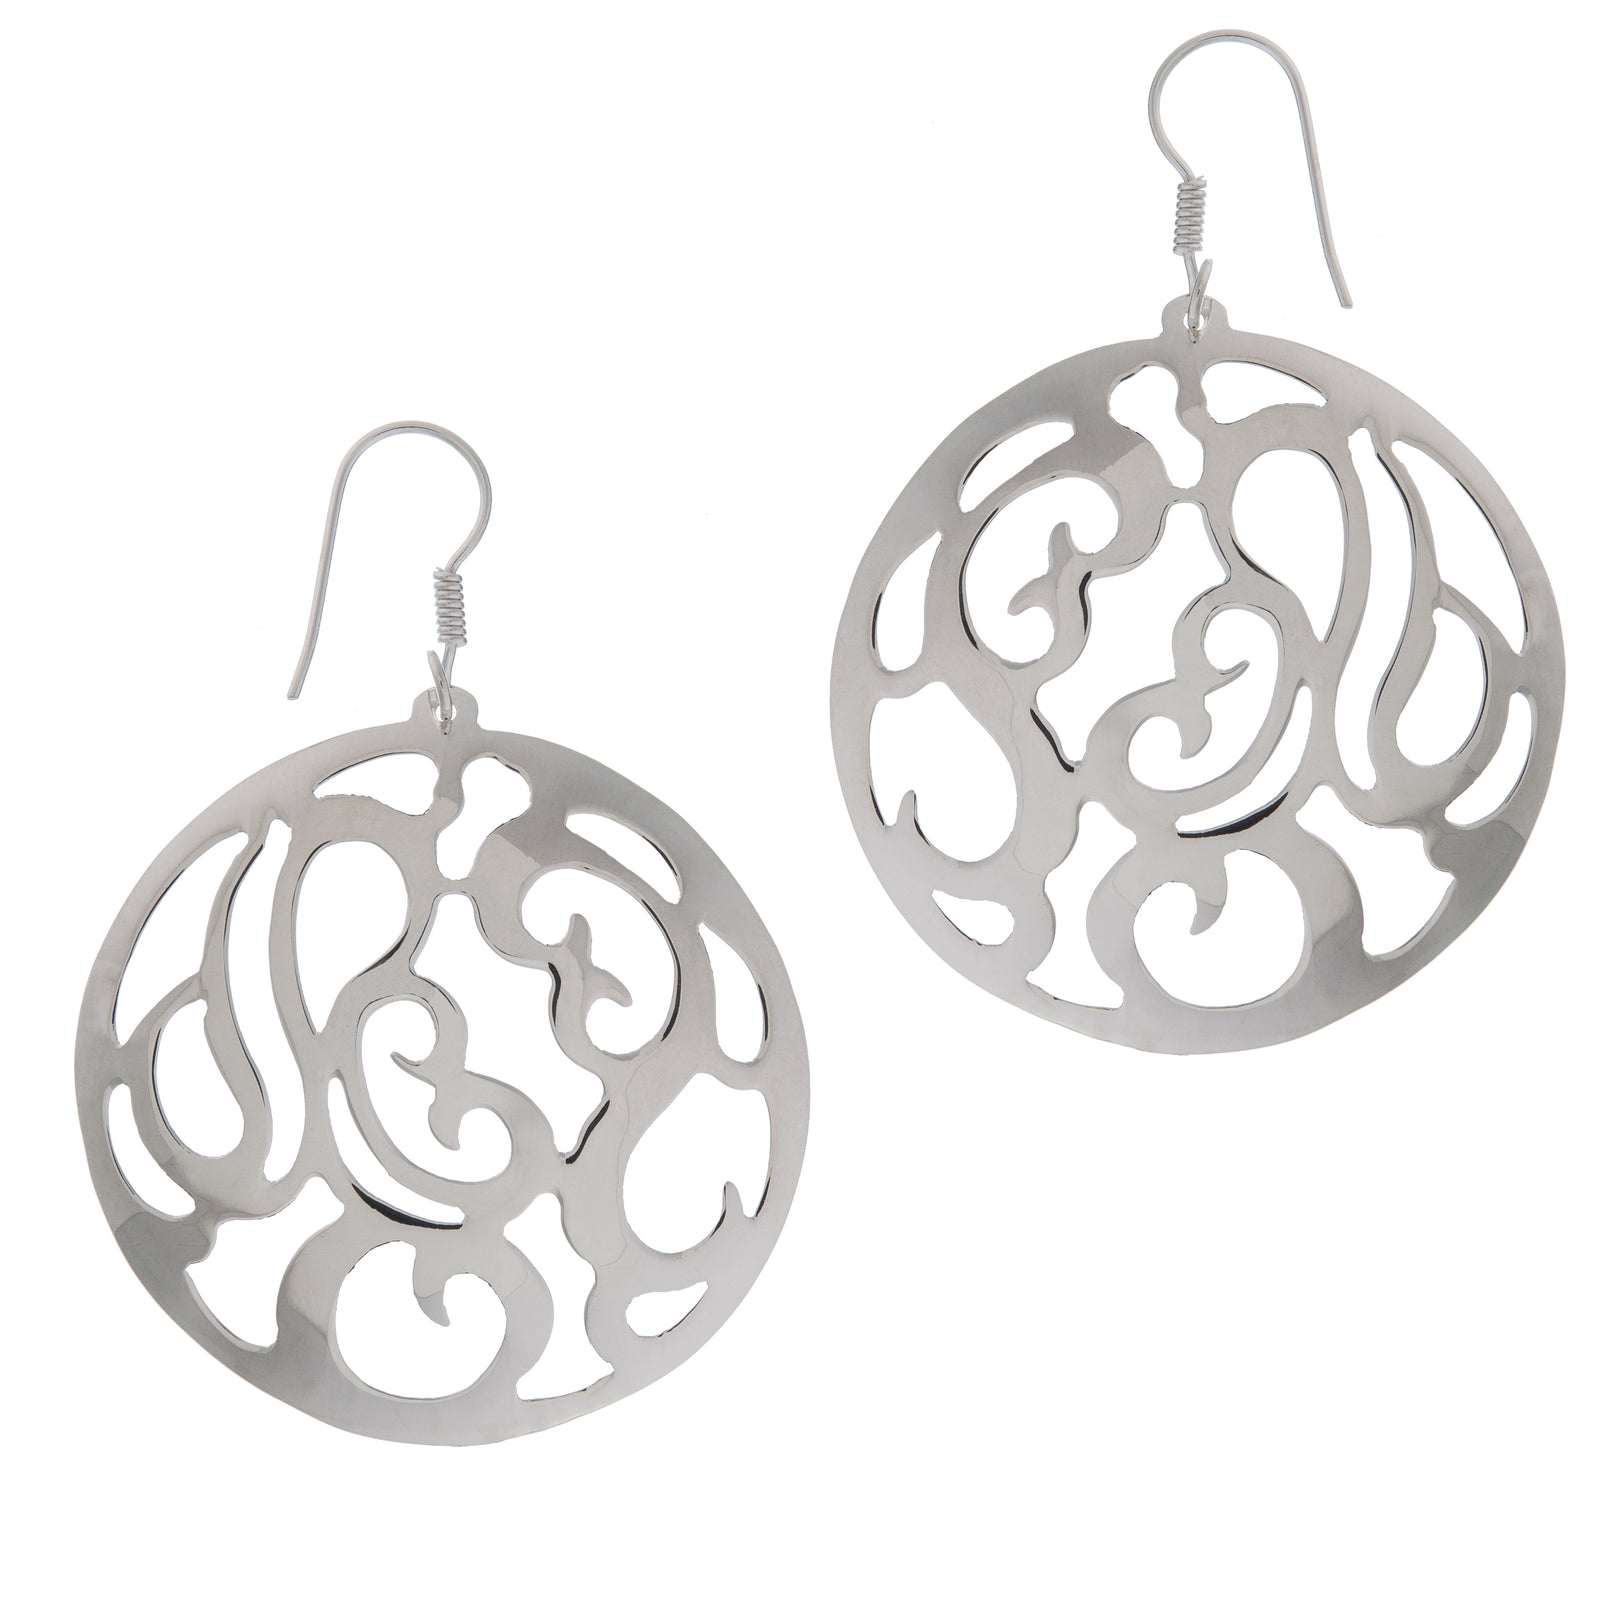 Sterling Silver Round Cut-Out Earrings | Charles Albert Jewelry